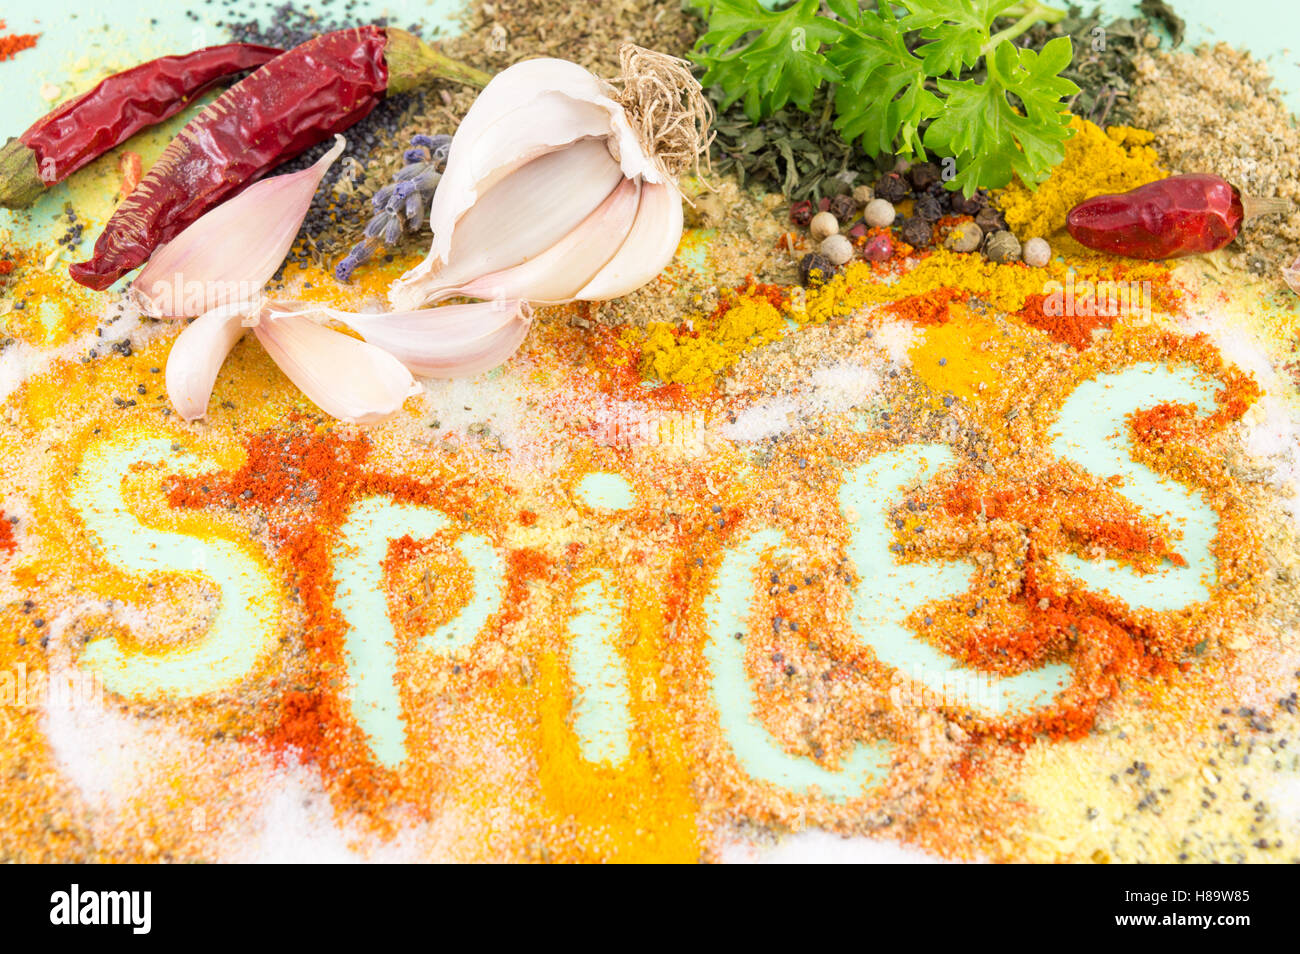 Word spices written in colorful seasoning background. Love cooking Stock Photo